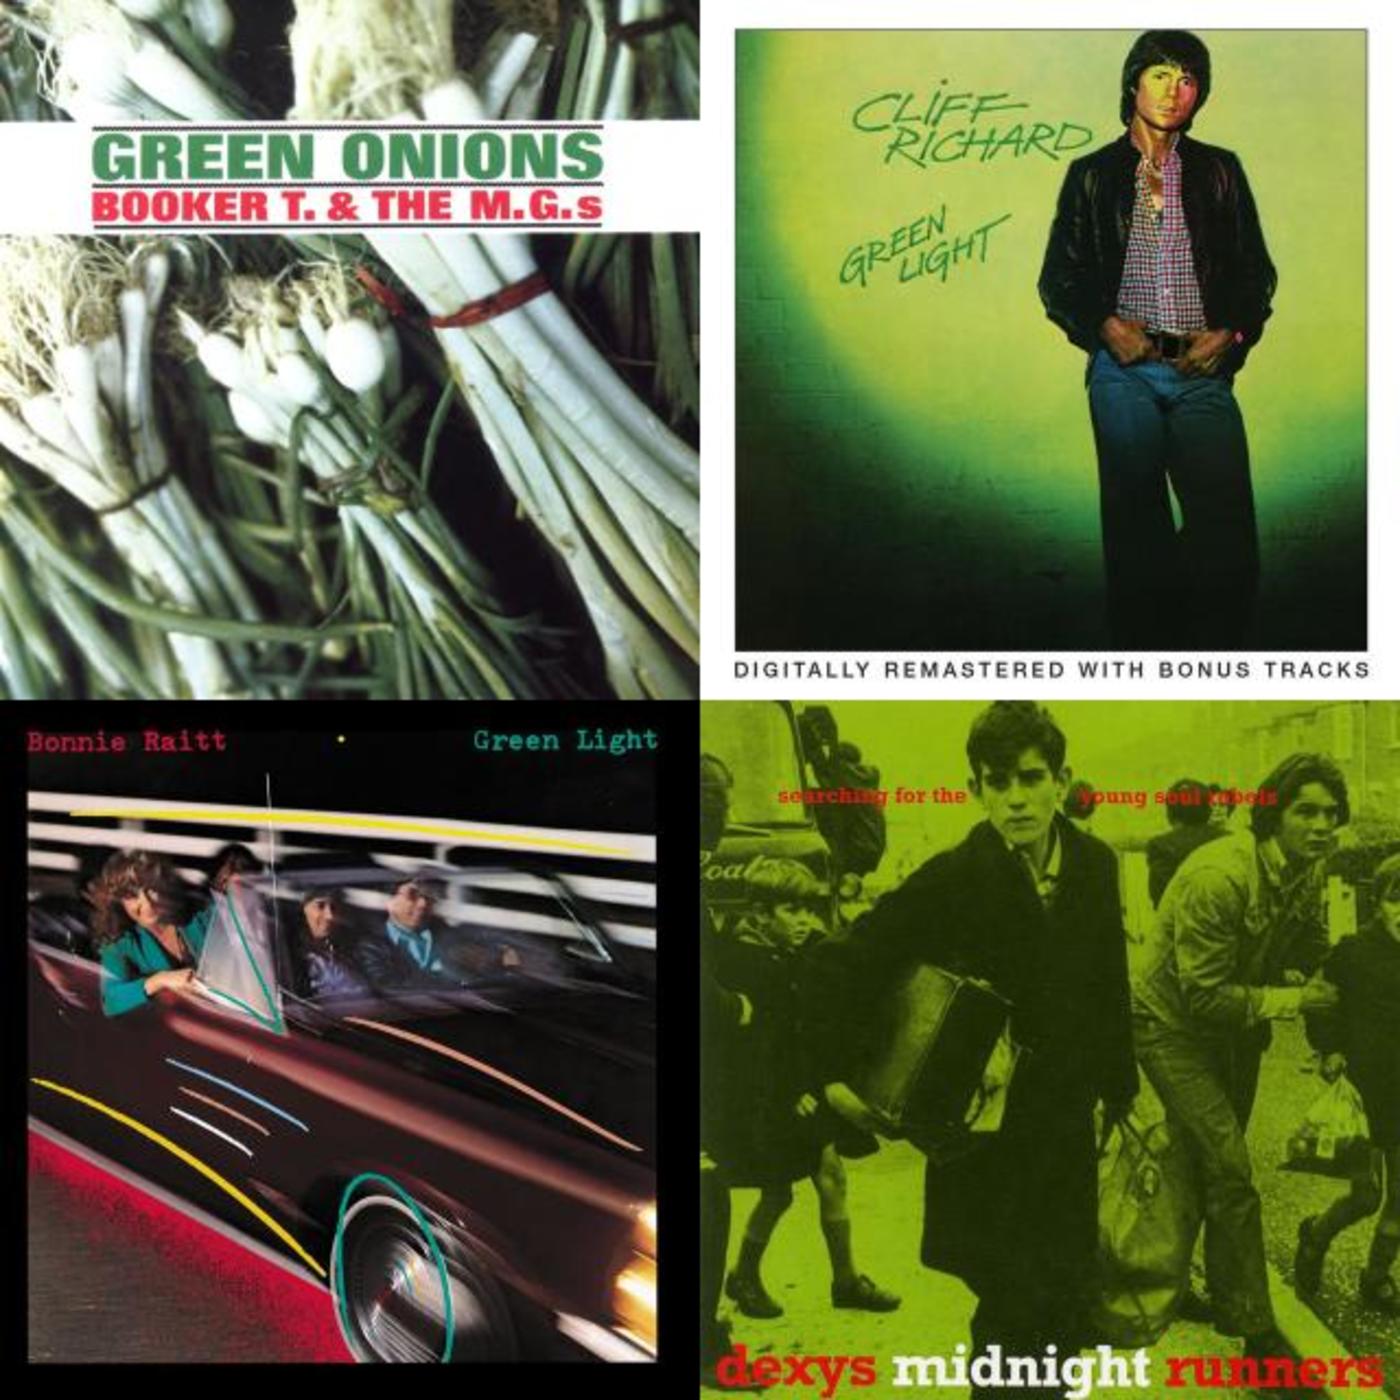 Forty Shades Of Green for St. Patrick's Day - Booker T. & The MG's, Bonnie Raitt, Cliff Richard, Dexys Midnight Runners, Yesca, Wilson Pickett, Jesse Winchester